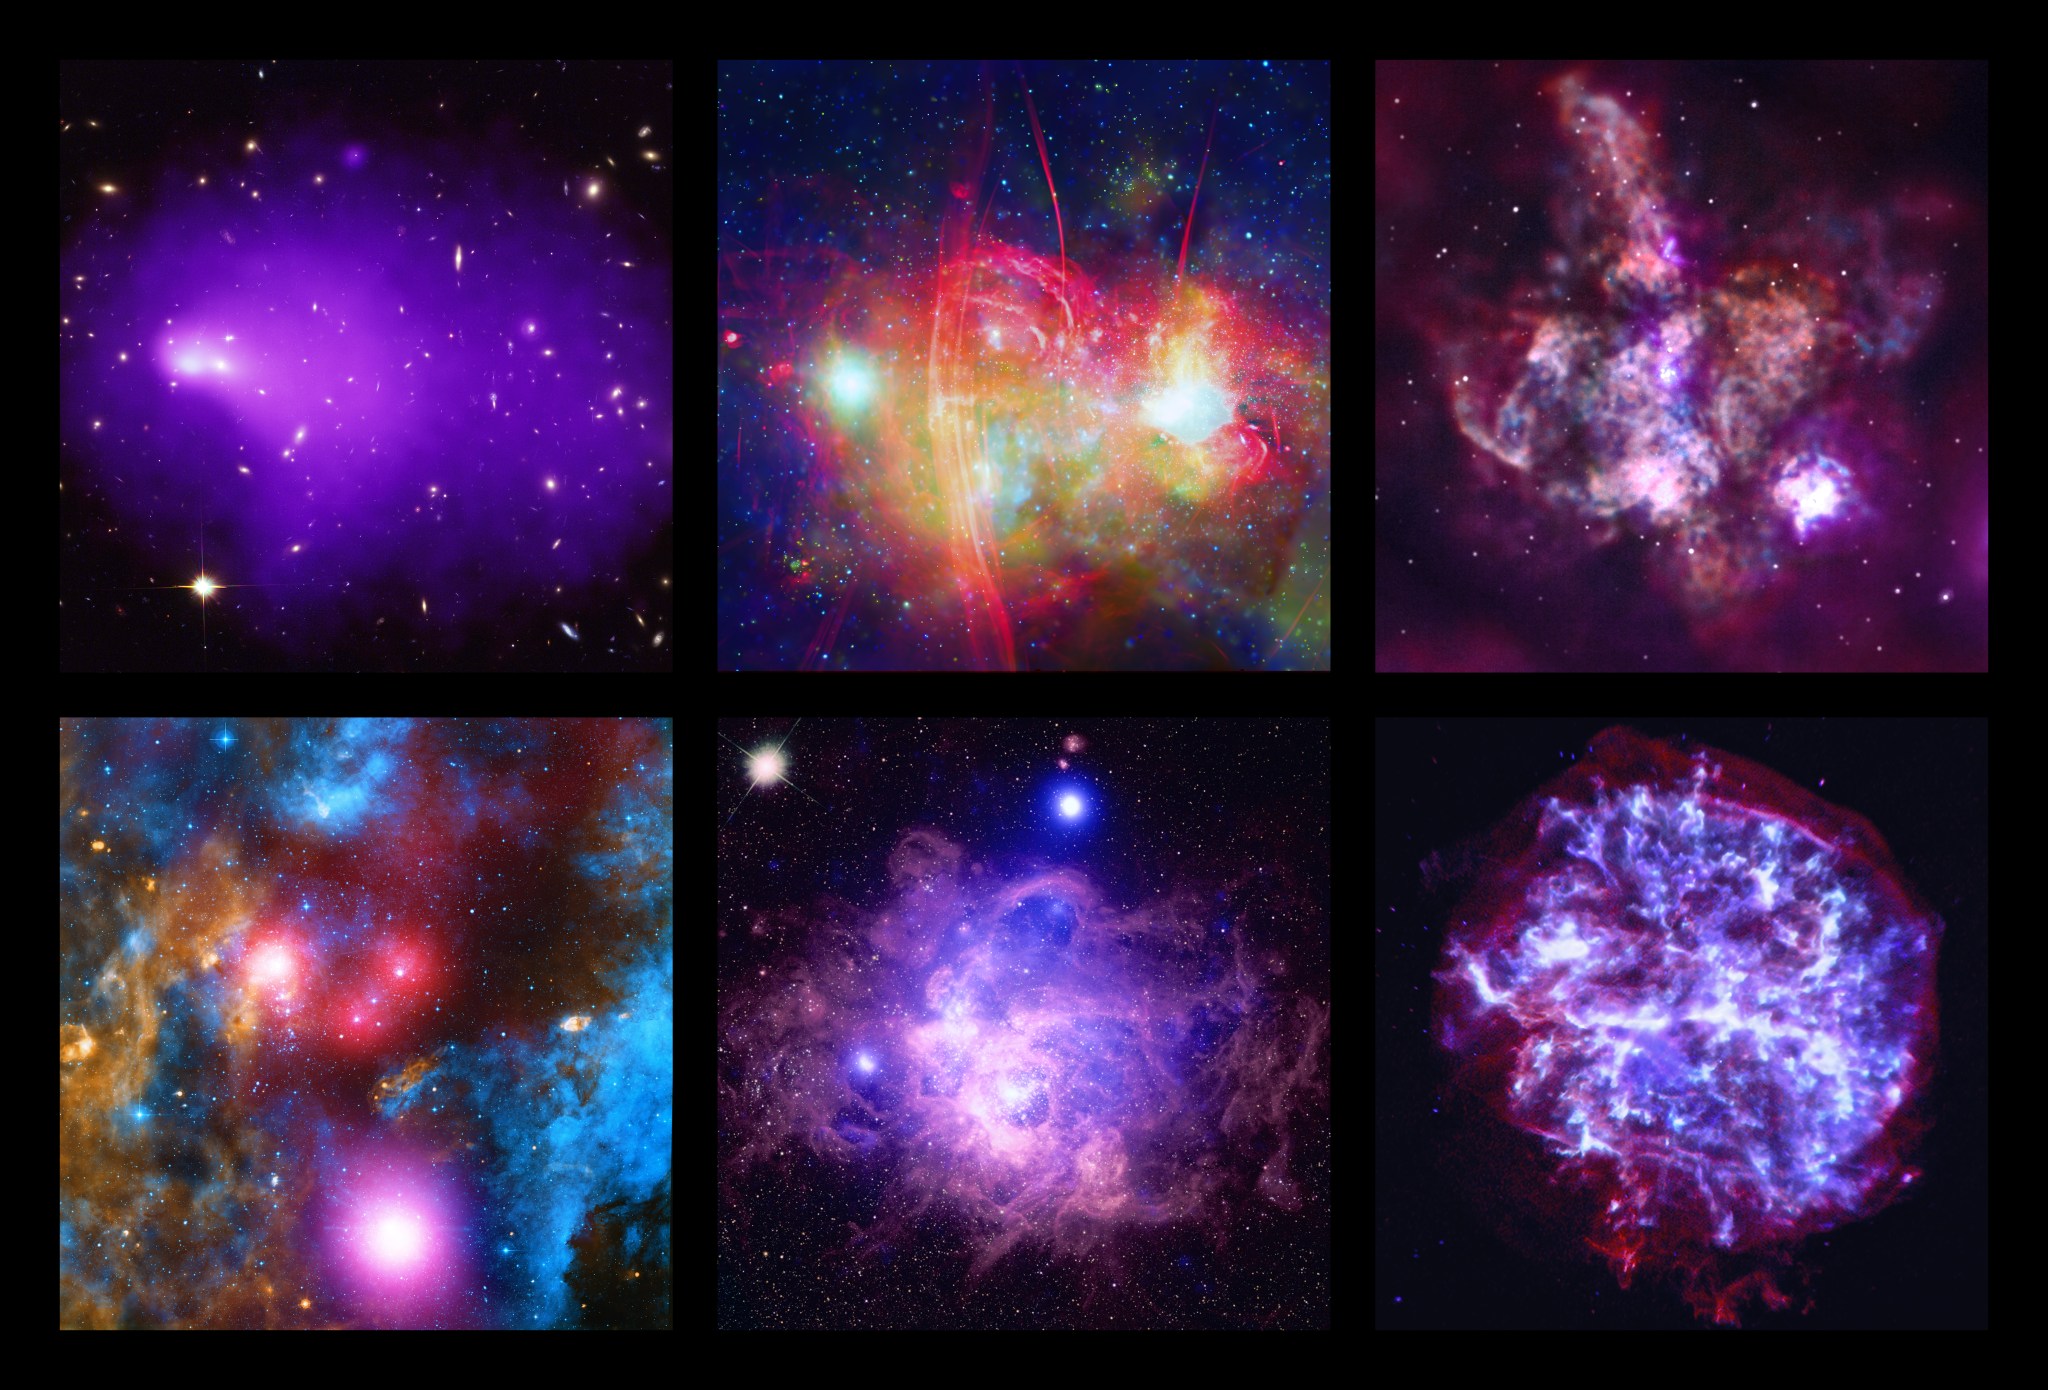 NASA’s Chandra X-ray Observatory is commemorating its 20th anniversary with an assembly of new images. 